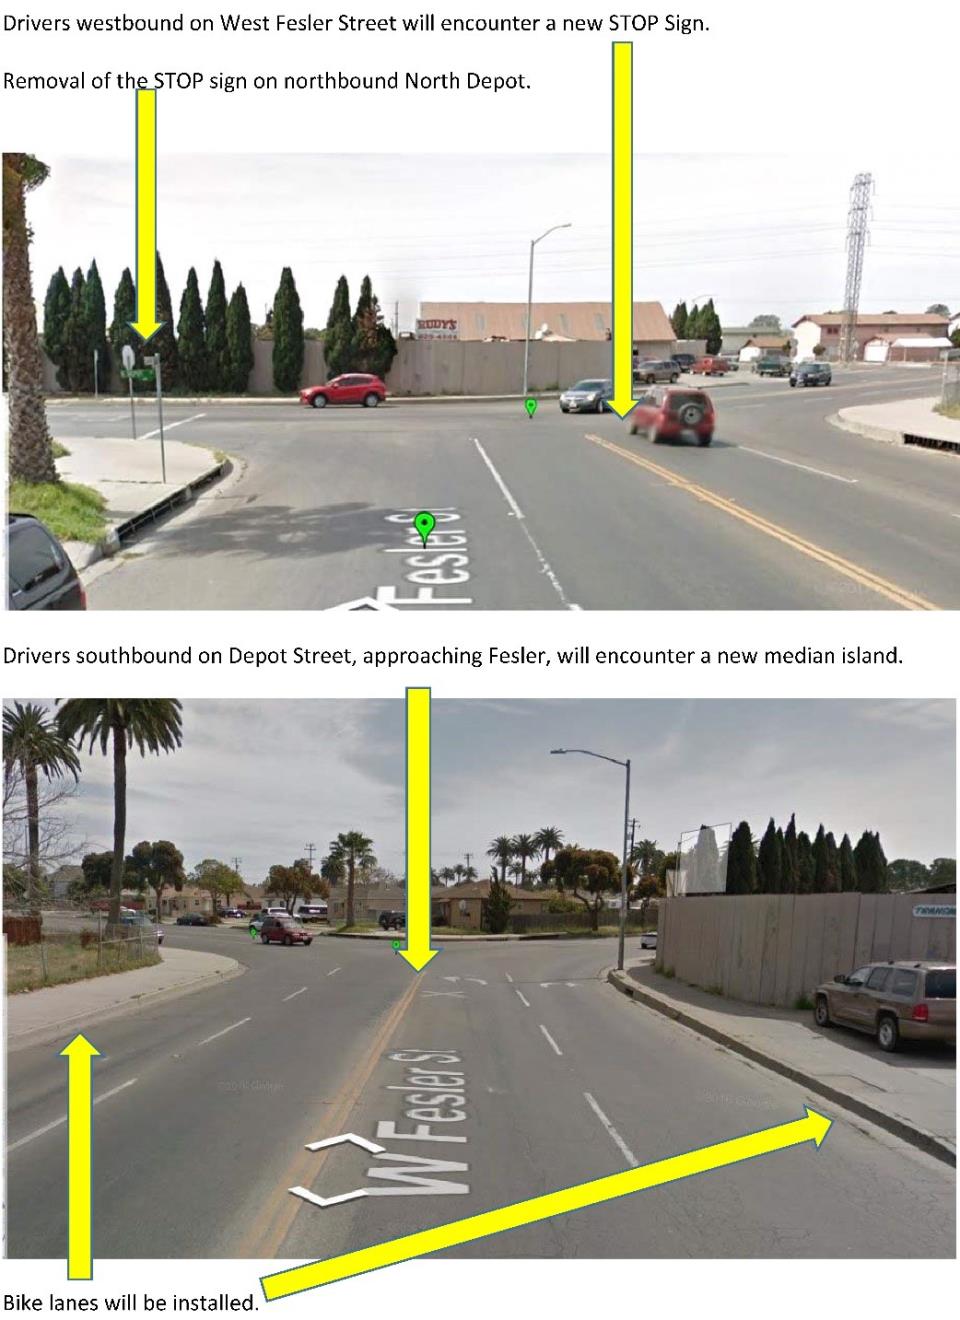 Two photos depicting traffic flow improvements at the intersections of Fesler, Depot, and Railroad streets